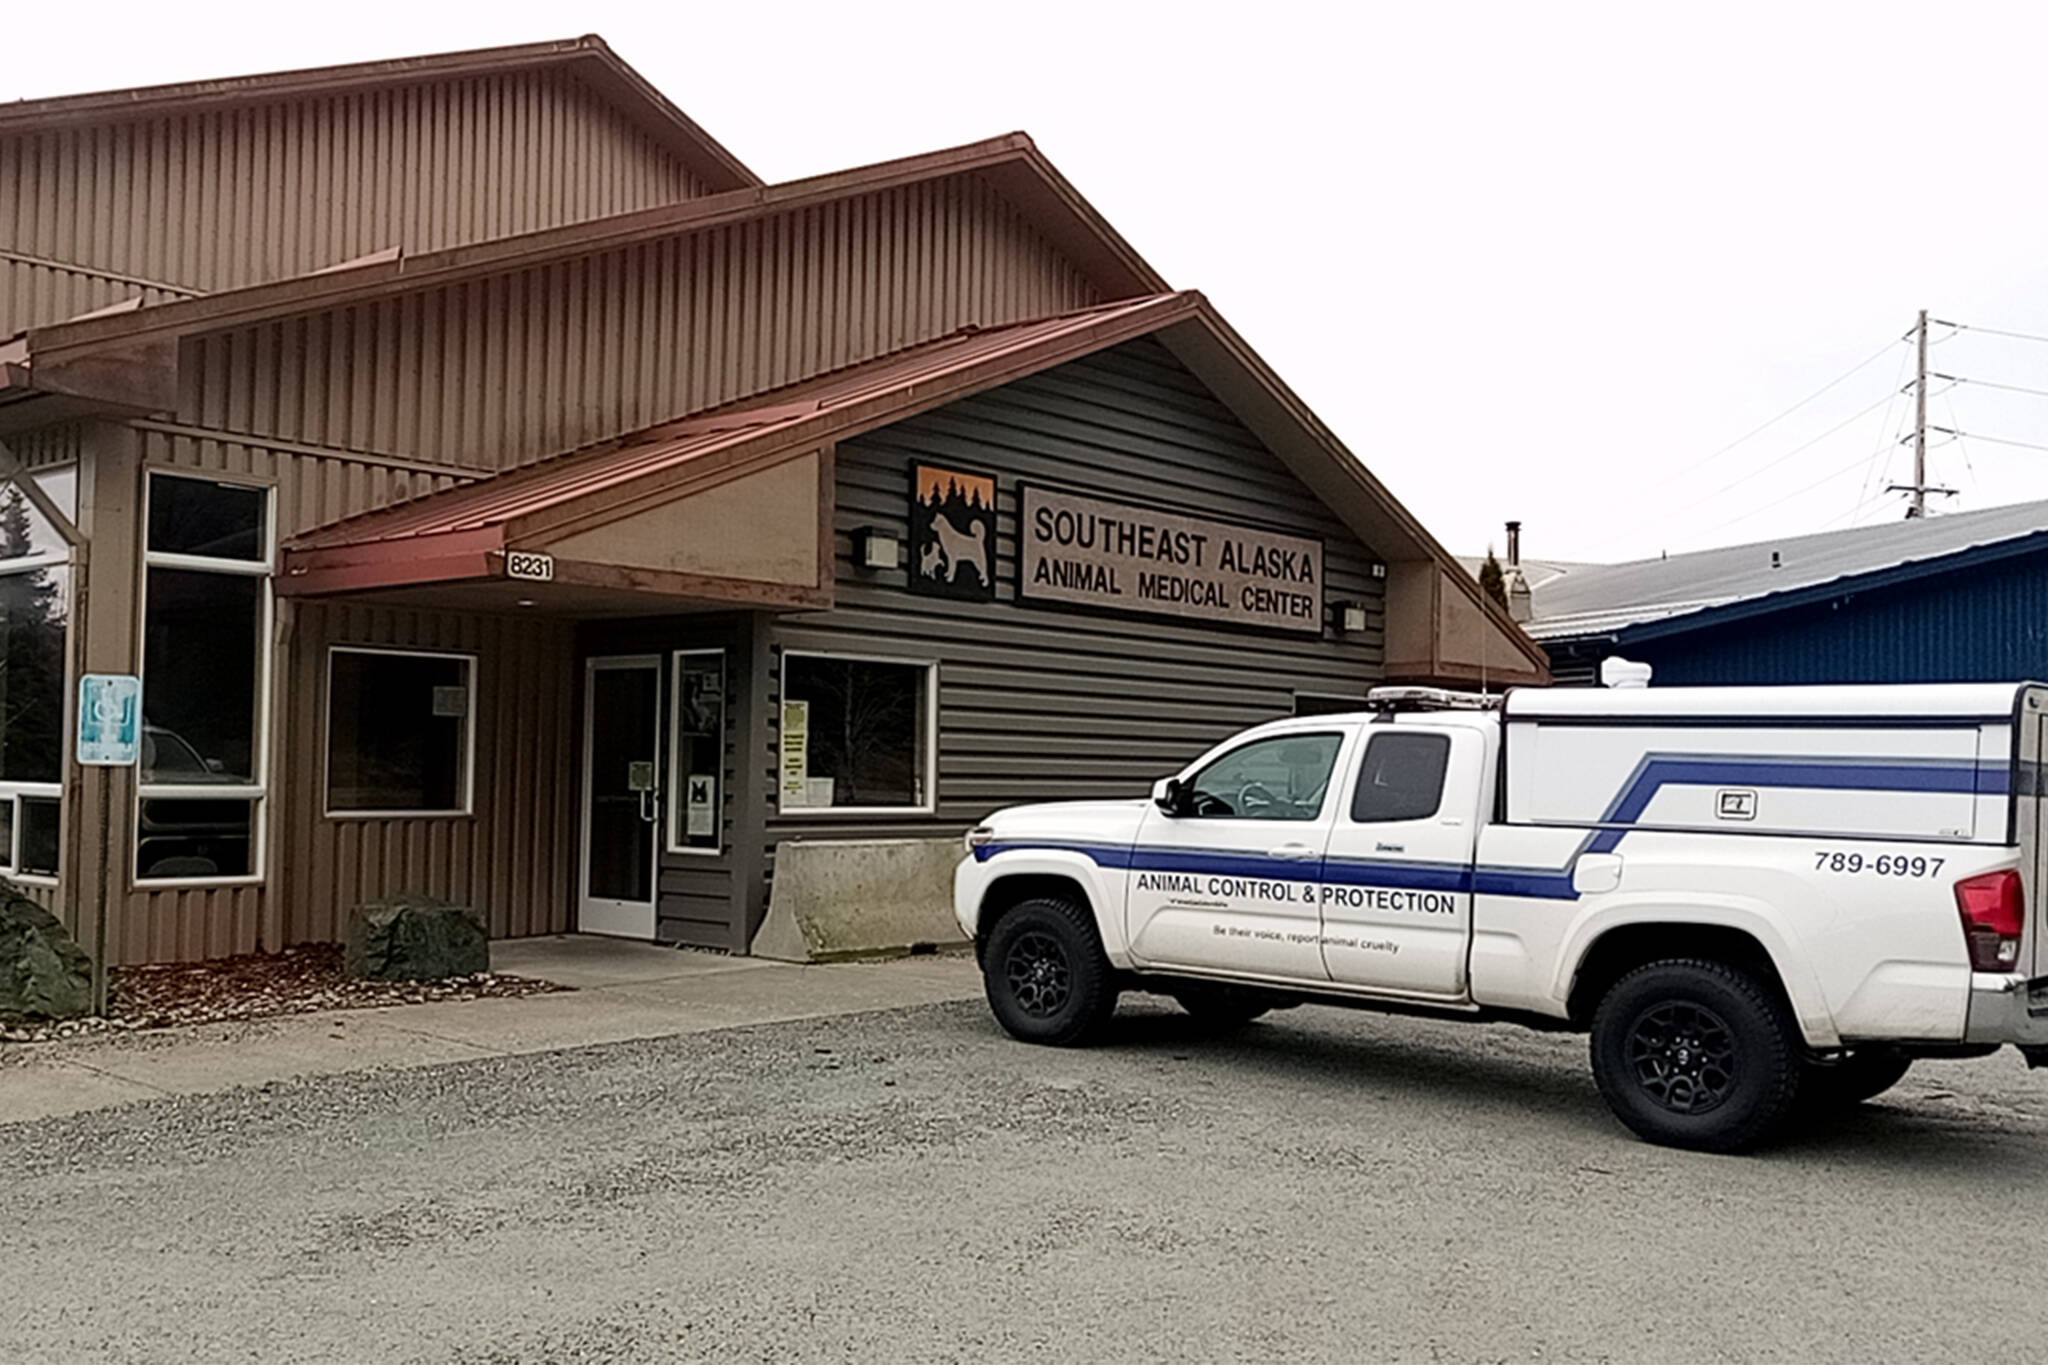 This photos shows Southeast Alaska Animal Medical Center, which recently announced its closure. The clinic intends to begin processing records requests from clients in May, according to an announcement from the clinic. (Mark Sabbatini / Juneau Empire)